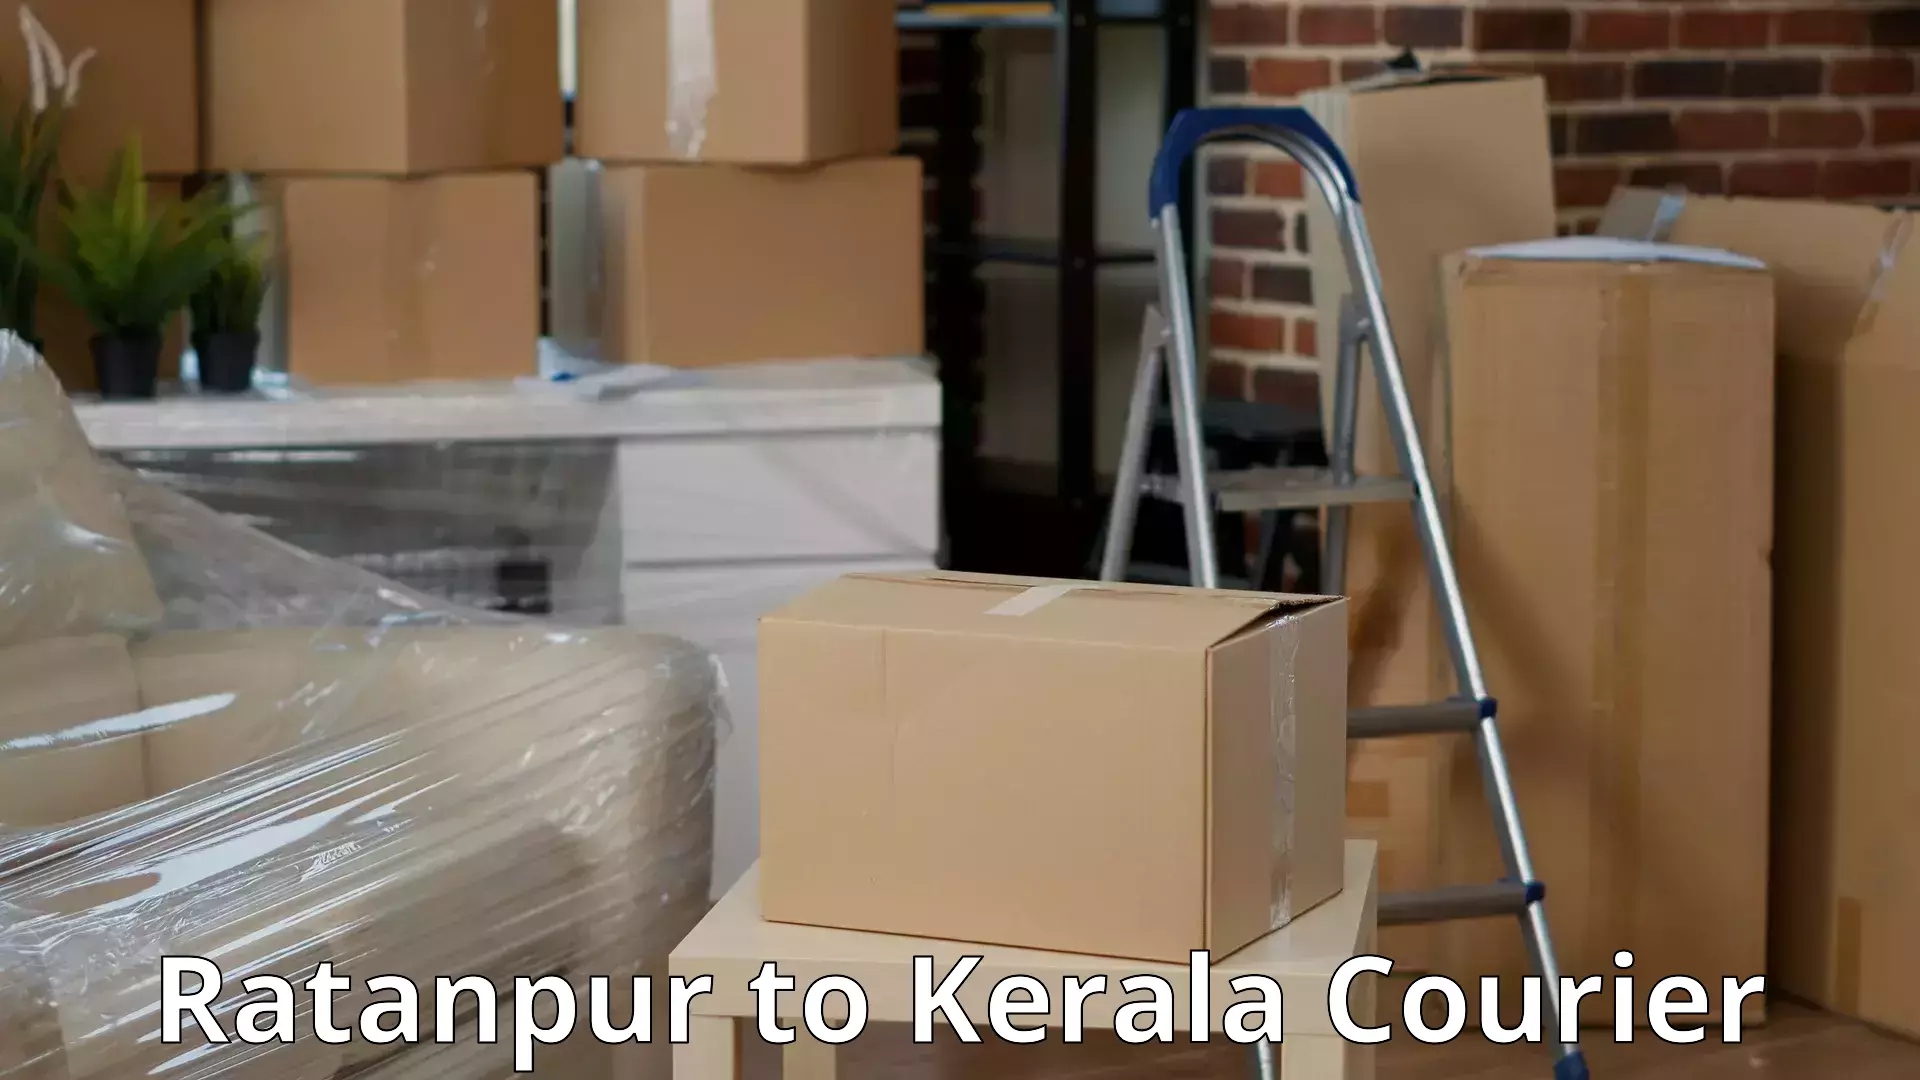 Expert goods movers Ratanpur to Aluva